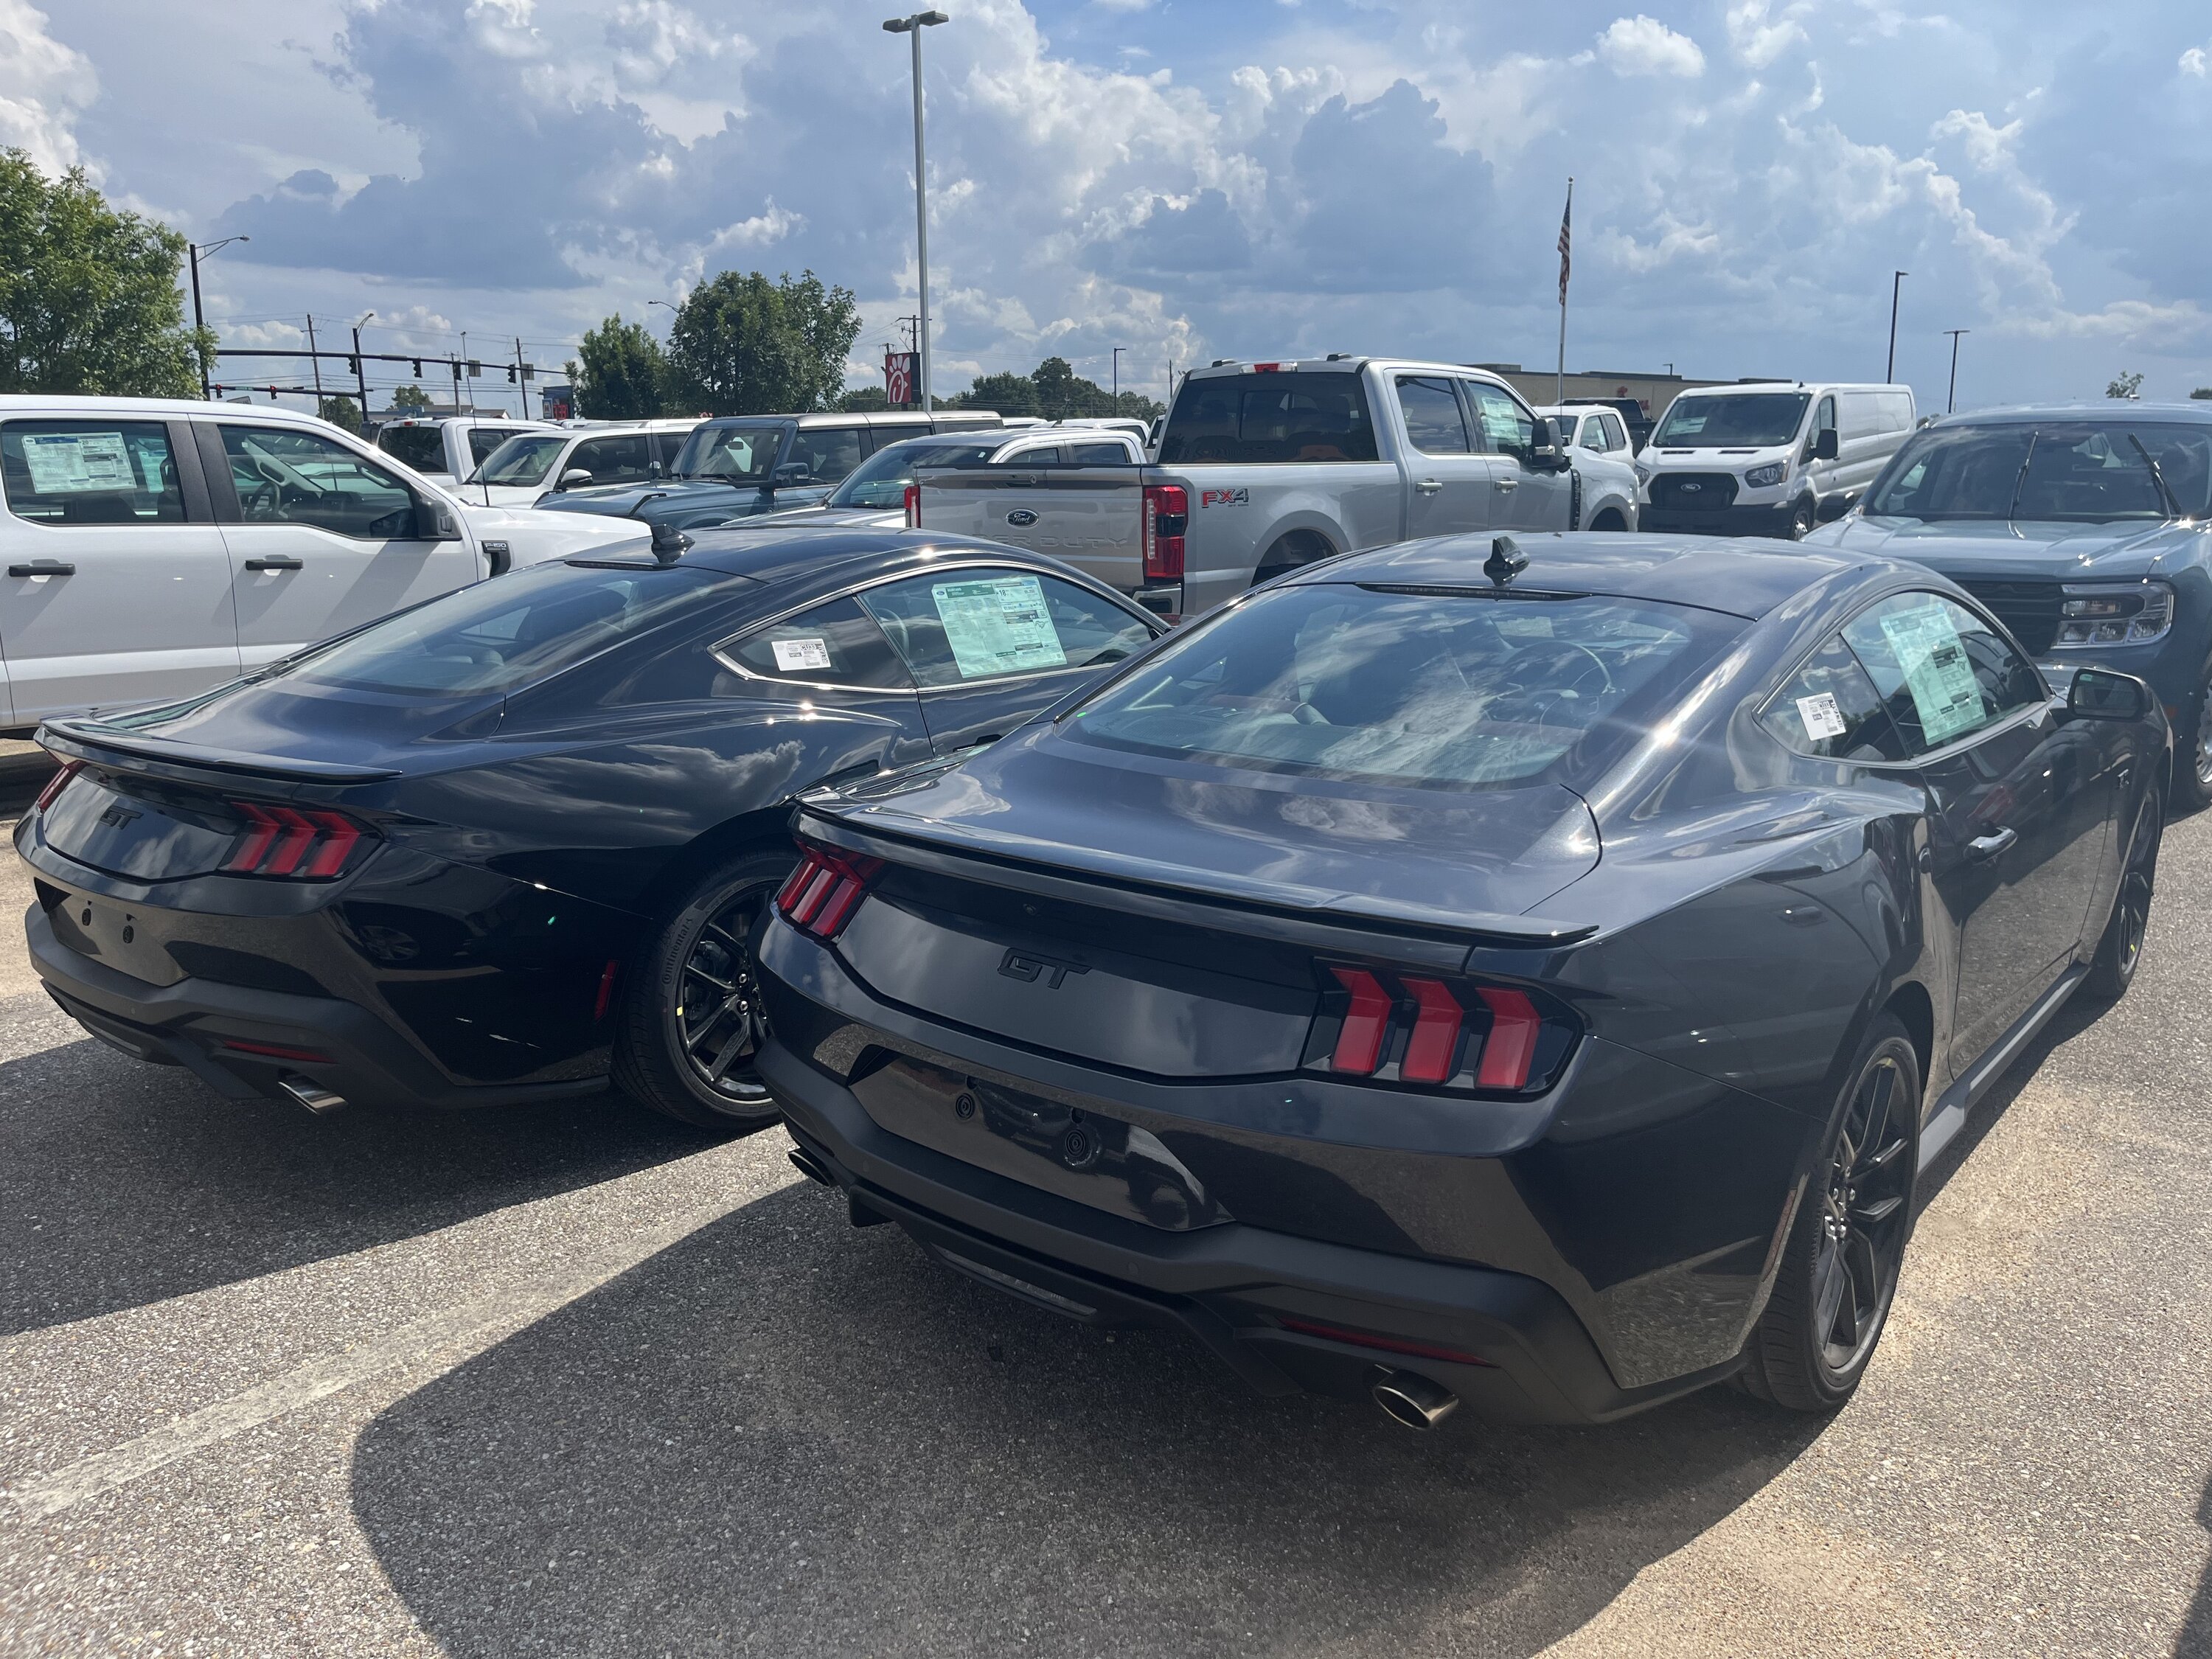 S650 Mustang Dealer just unexpectedly received 4 GTs!! IMG_7926